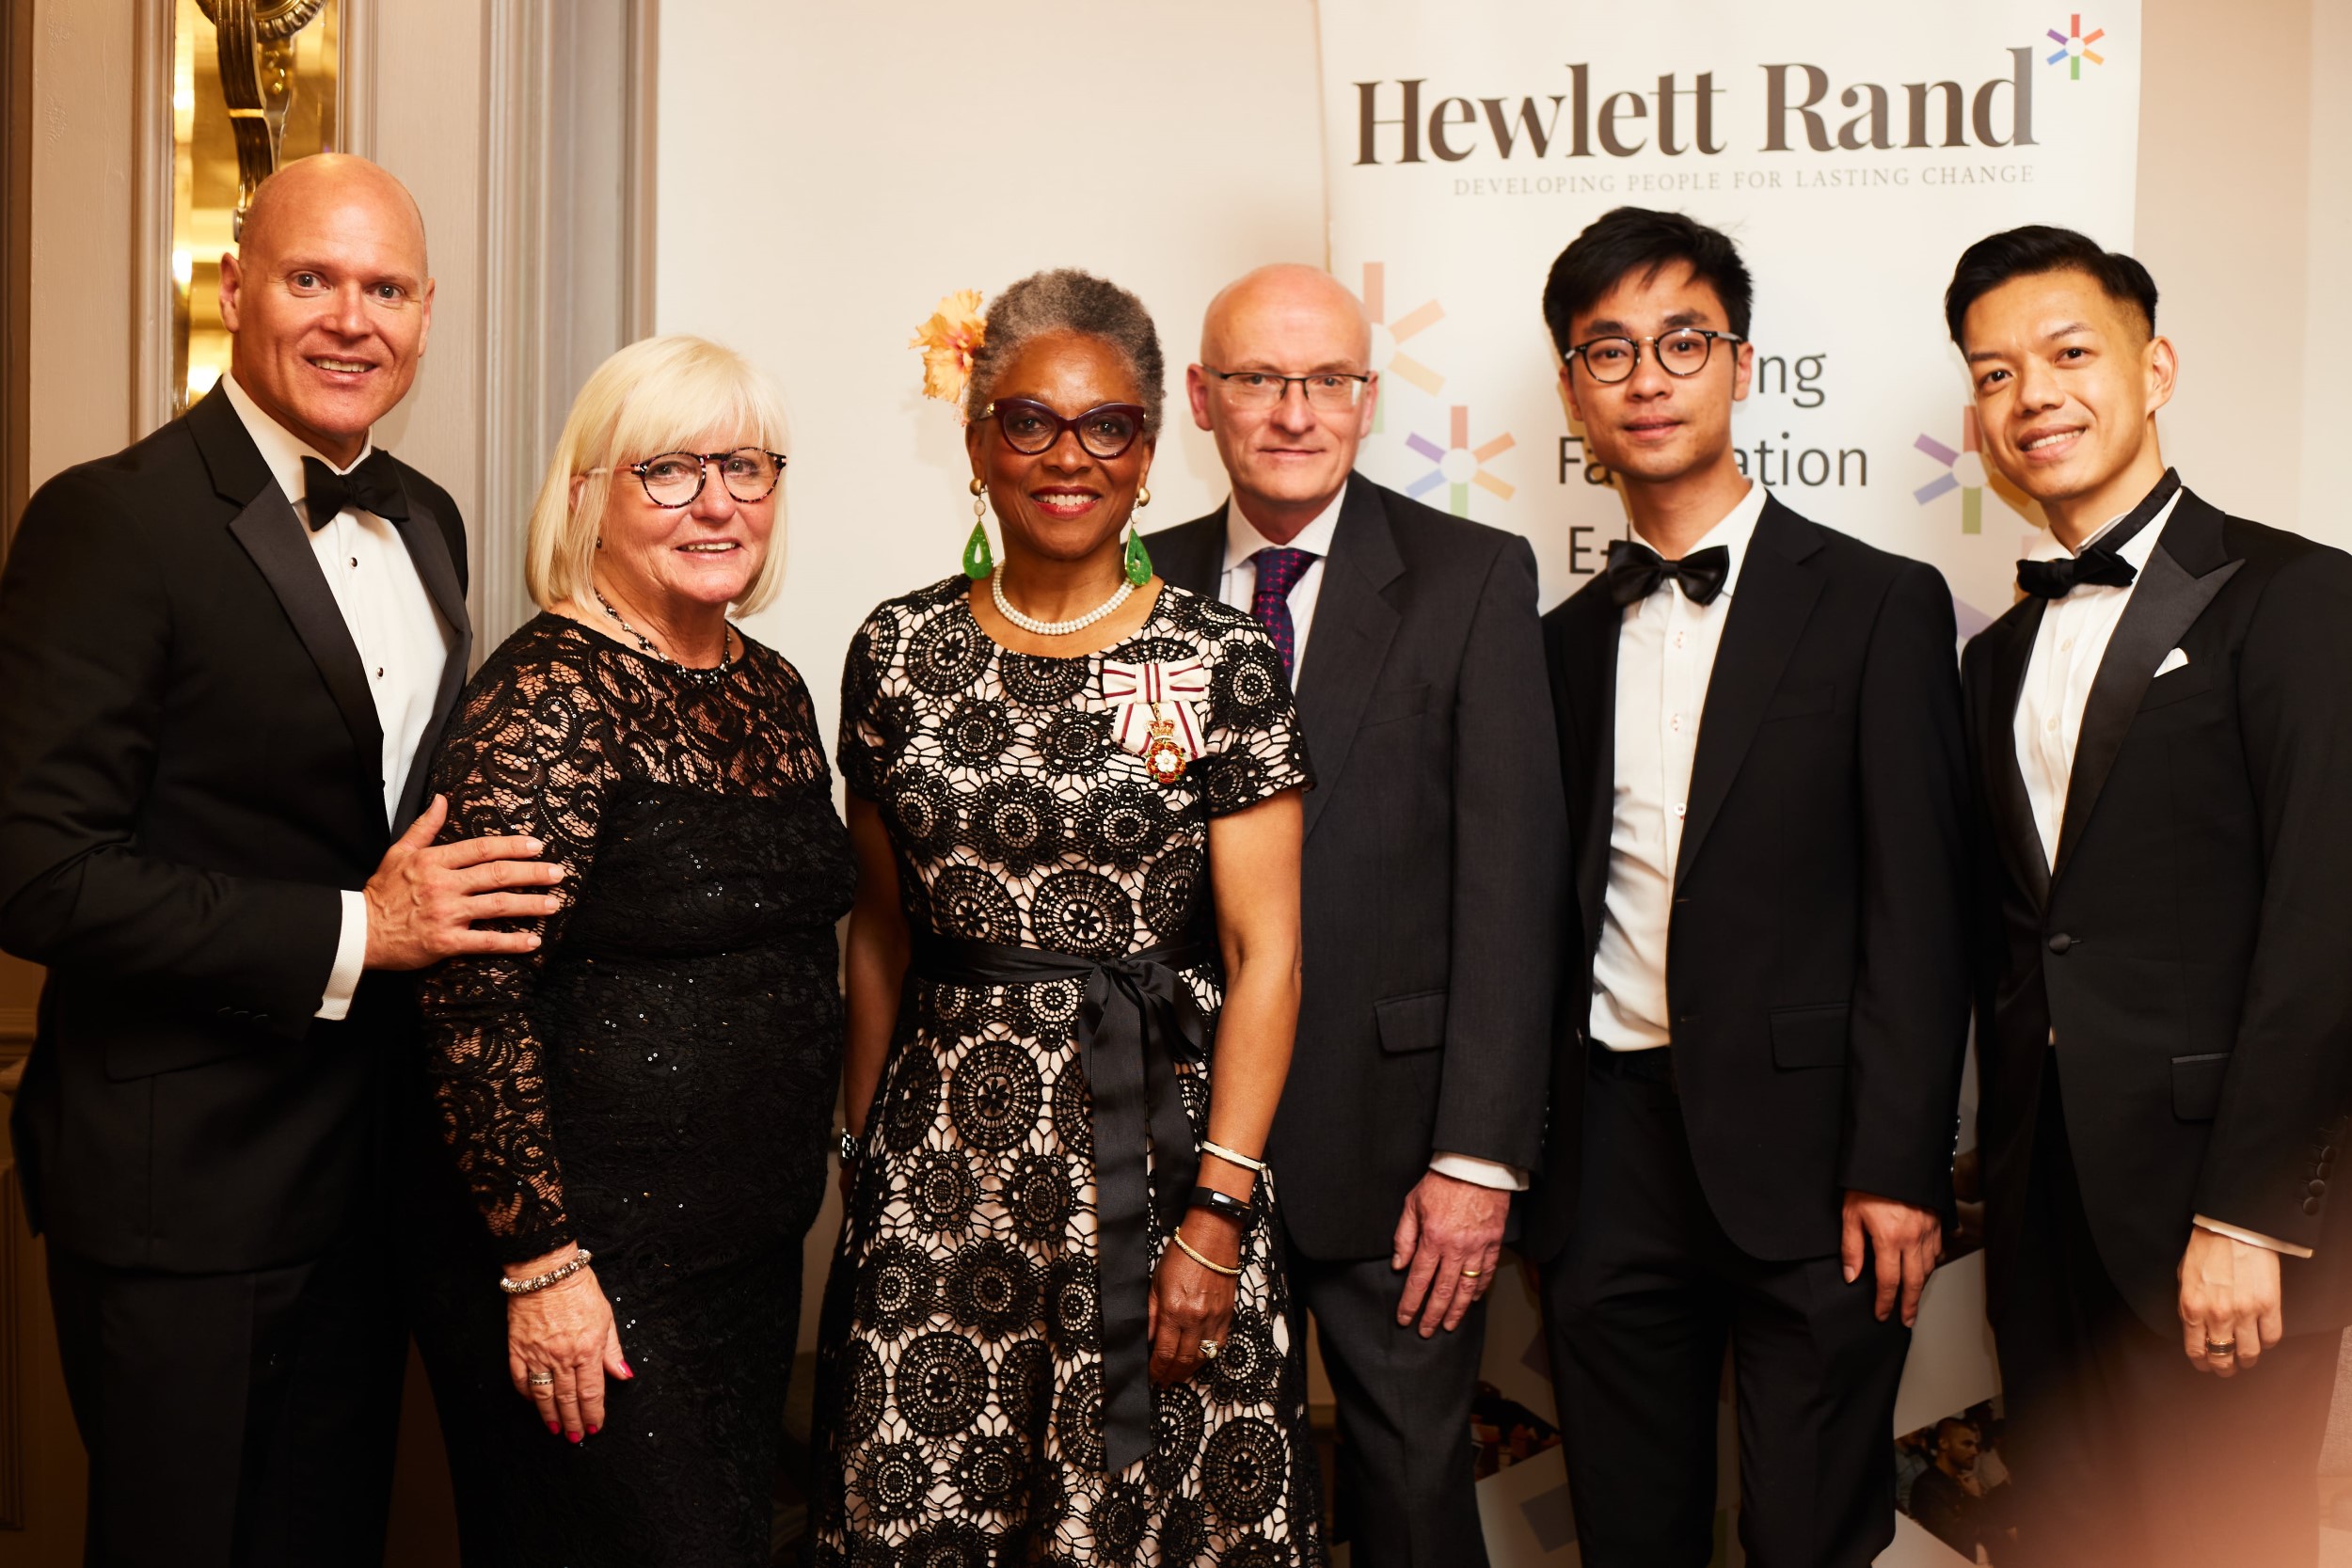 In the middle is Peaches Golding in a black and white dress. To her right are three men in suits. To her left is Richard Lowe in a suit and Jane Dare in a black dress. Behind them is a Hewlett Rand sign.